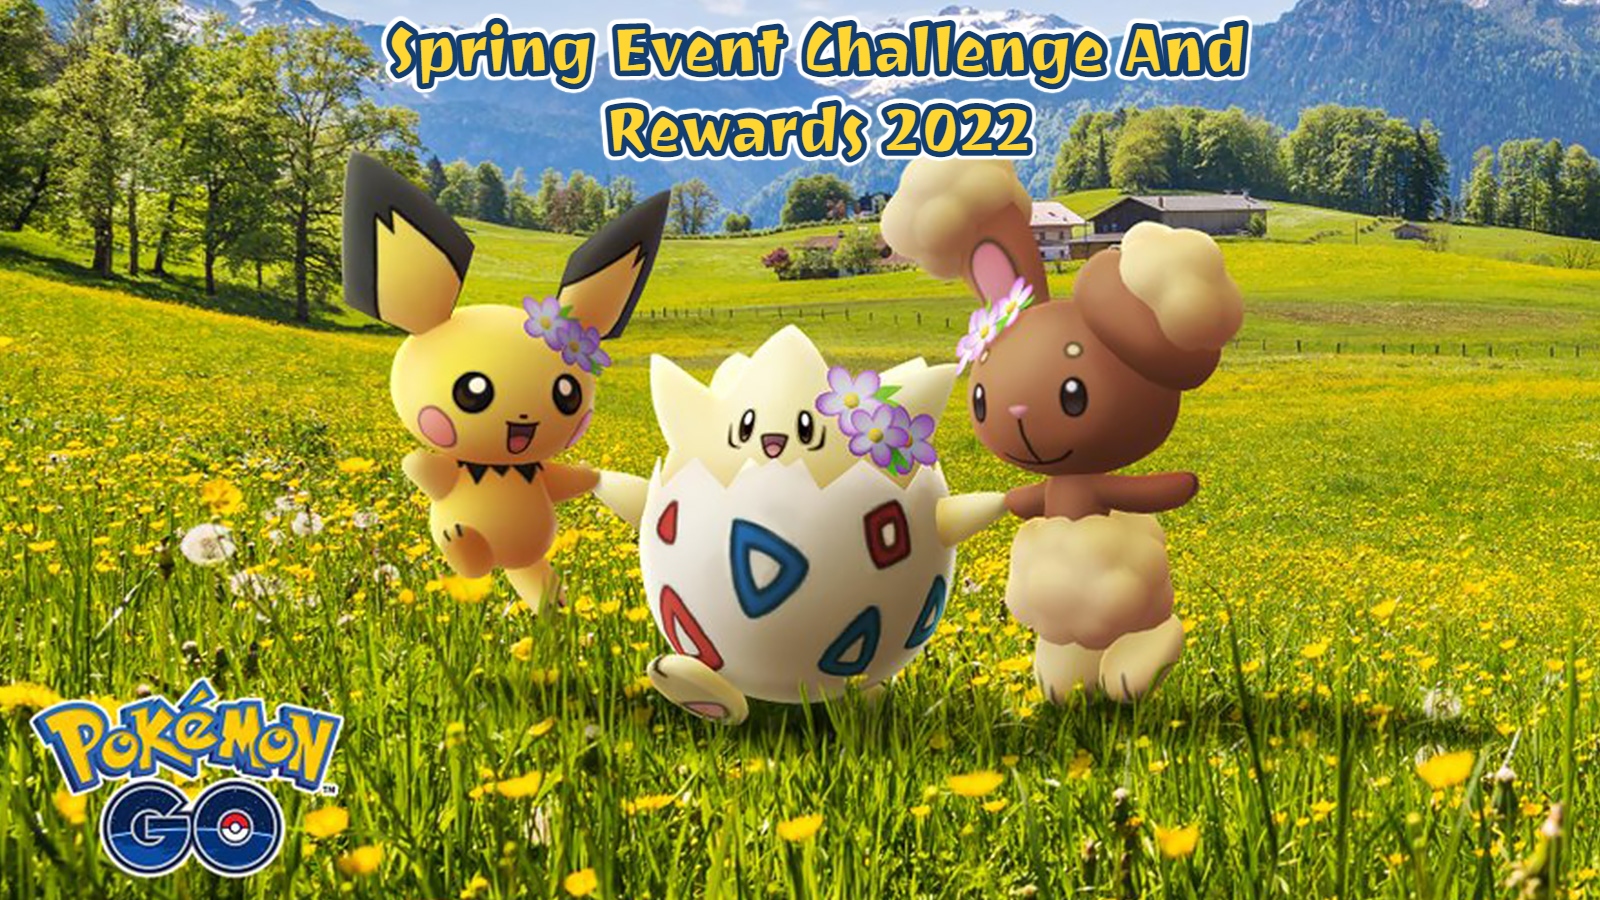 You are currently viewing Pokemon Go Spring Event Challenge And Rewards 2022